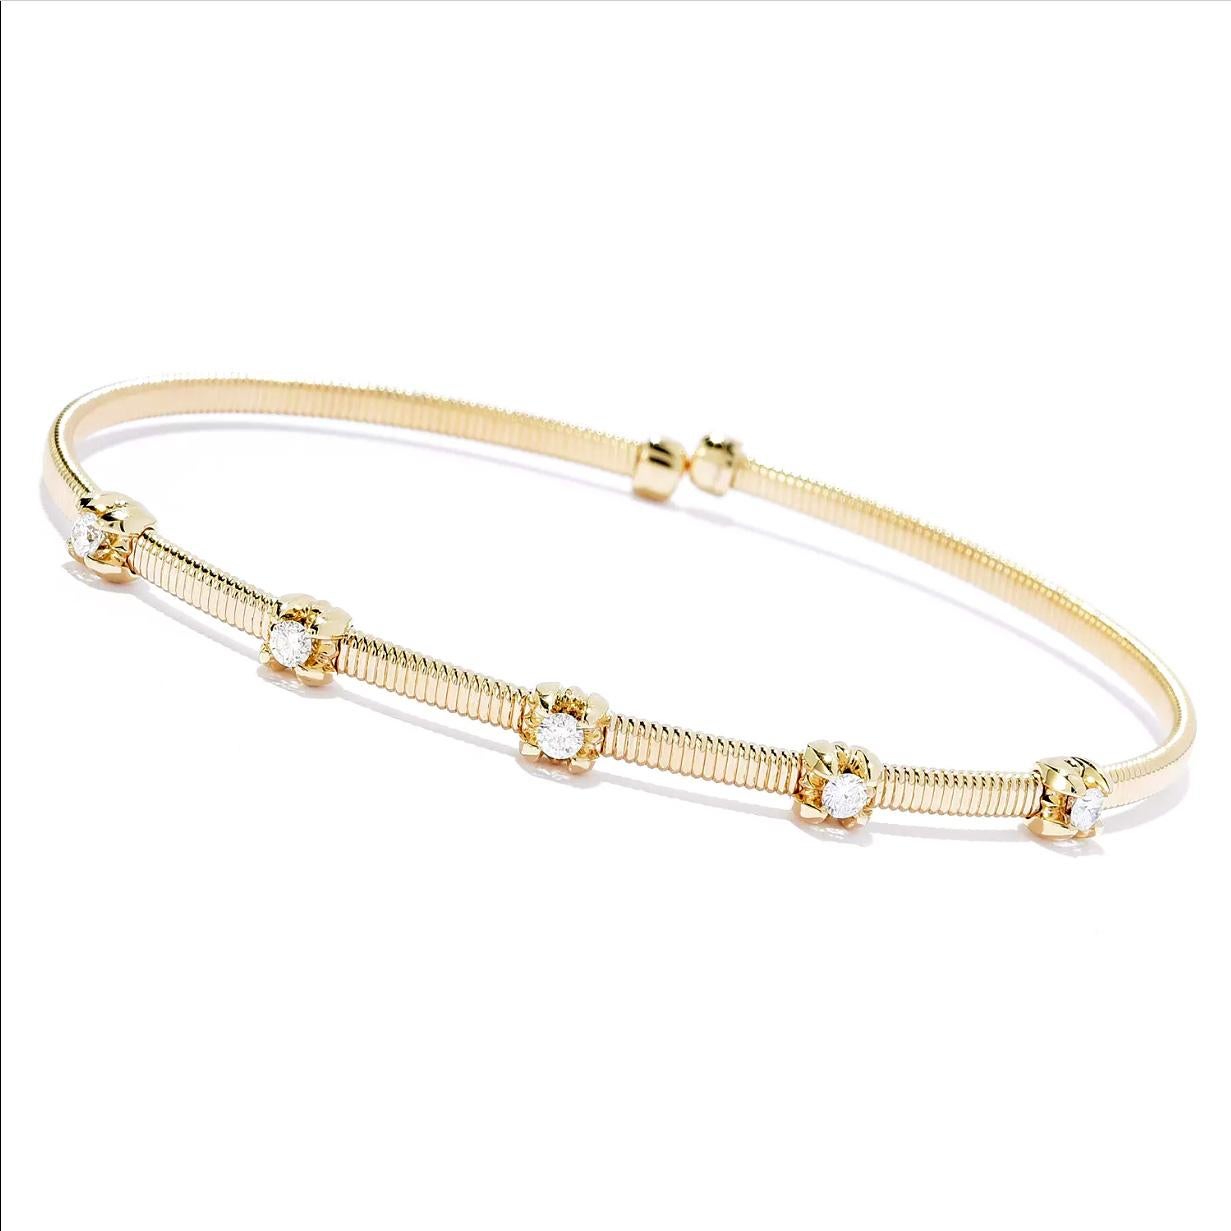 In order to achieve a truly finished look, sometimes all it takes is a delicate touch of shimmer and brilliance. Enhance your ensemble by adorning yourself with the captivating radiance of this exquisite  new flex cuff bracelet. Meticulously created